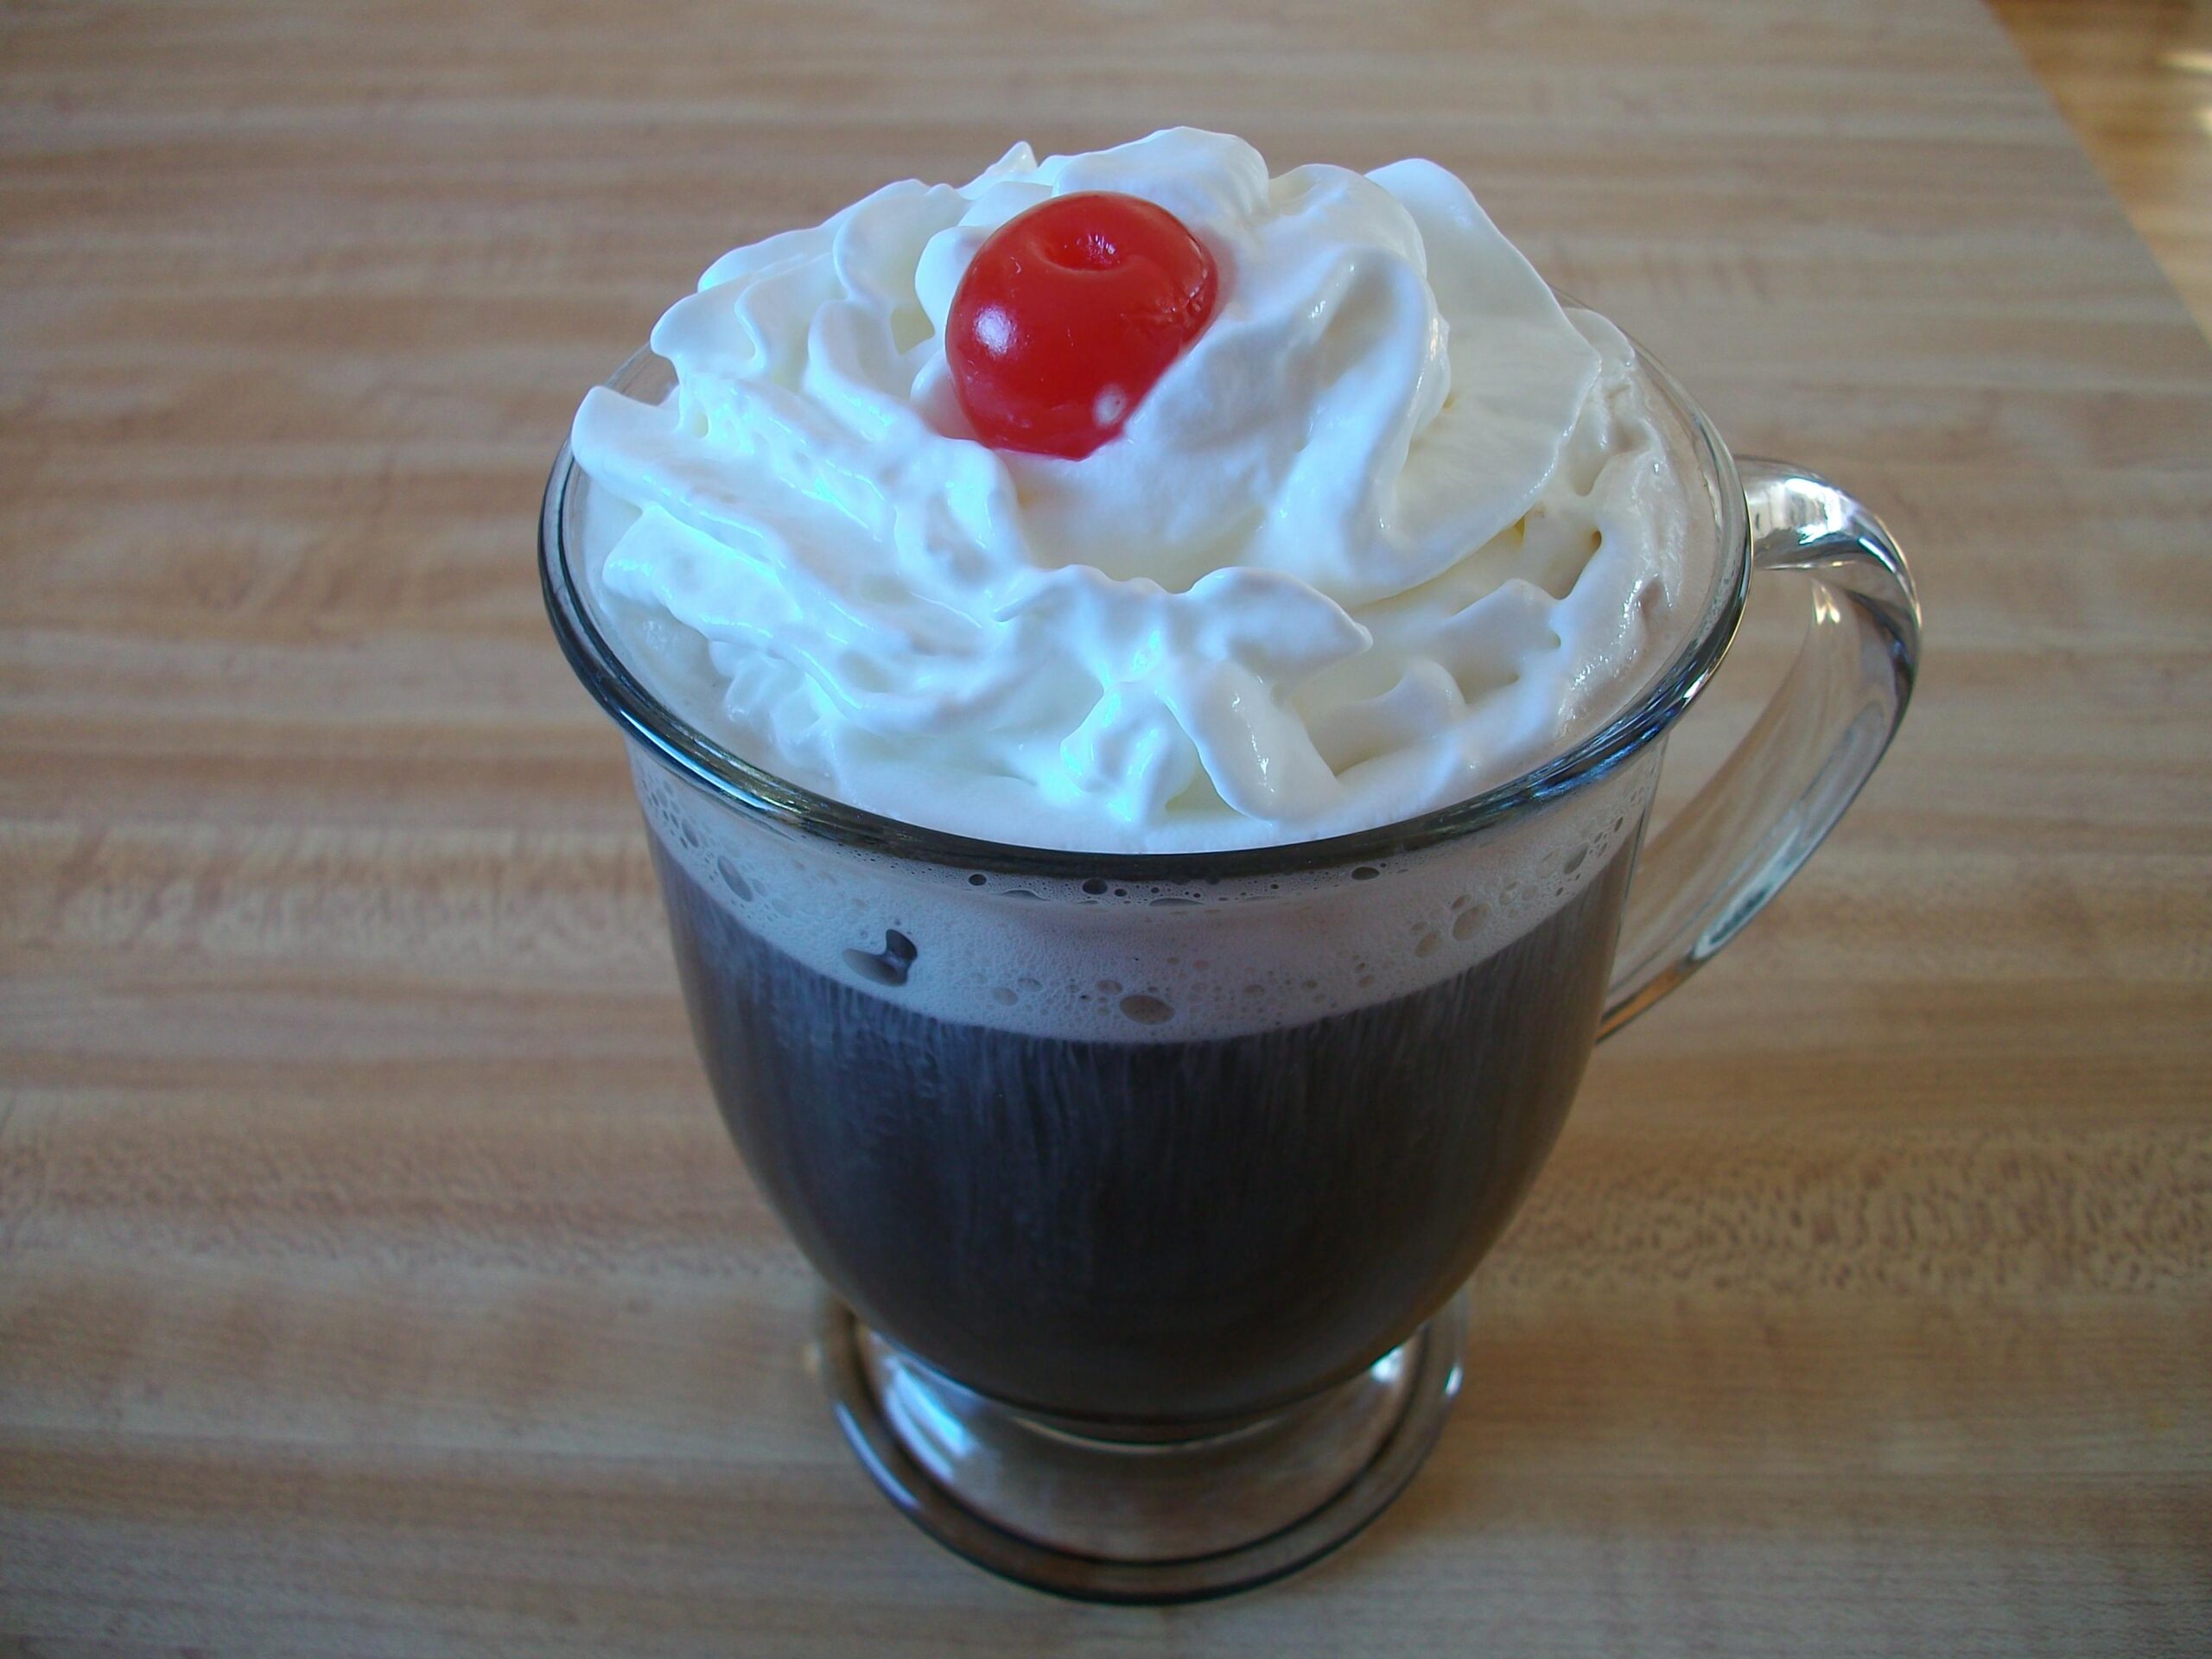 Elevate Your Morning with This Rich Cherry Mocha Coffee